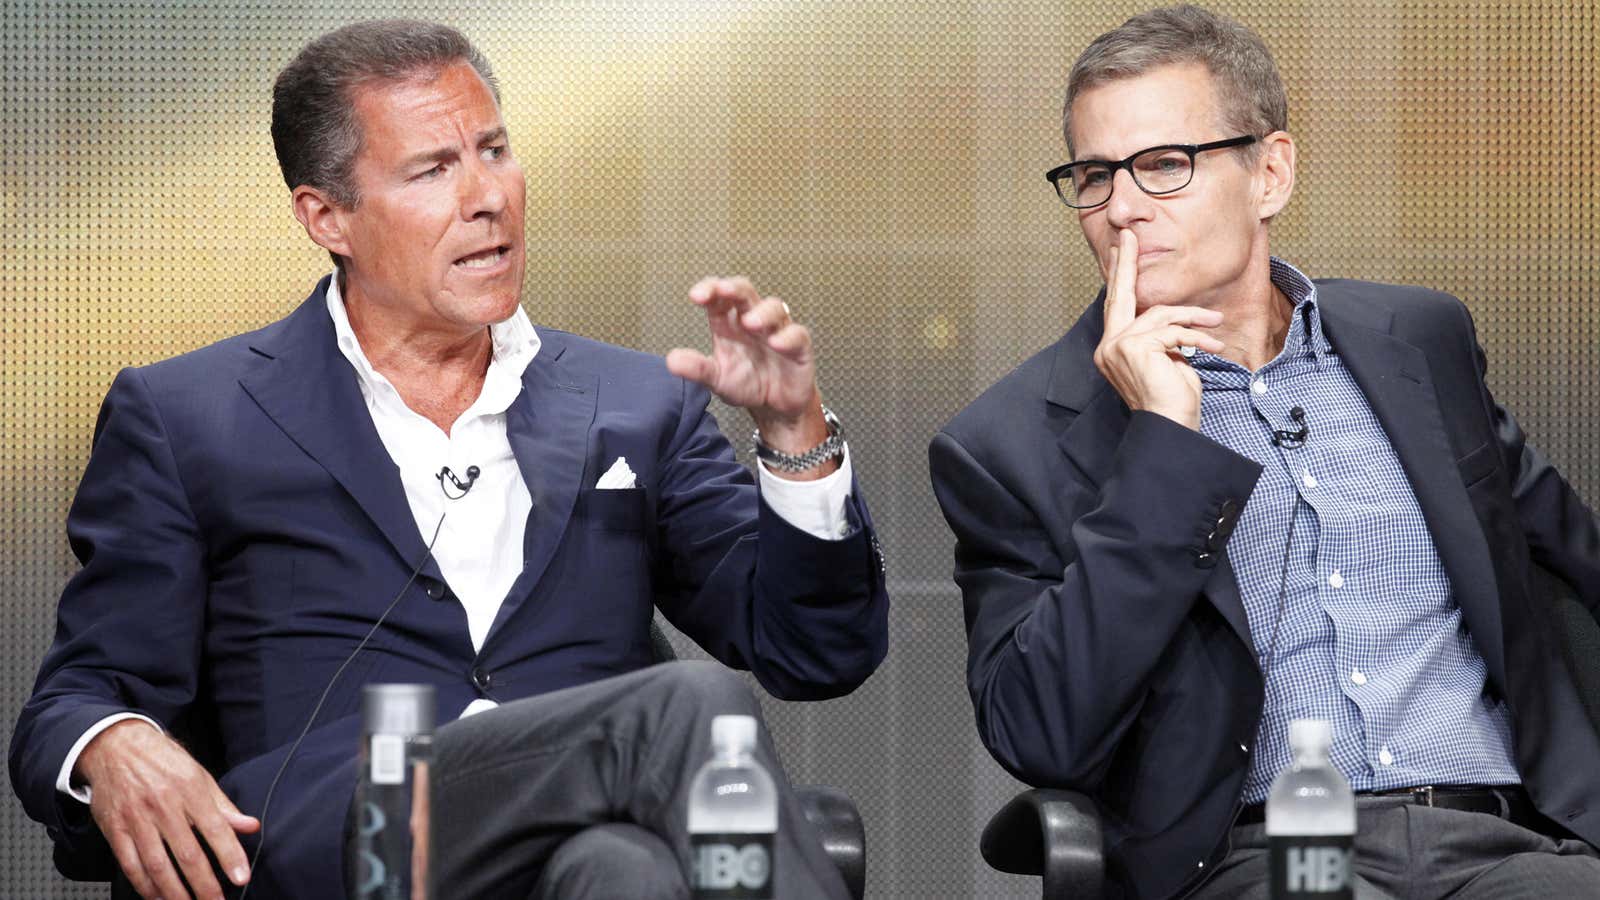 Always be elevating: HBO chief executive Richard Plepler, left, and Michael Lombardo, president of programming at HBO.